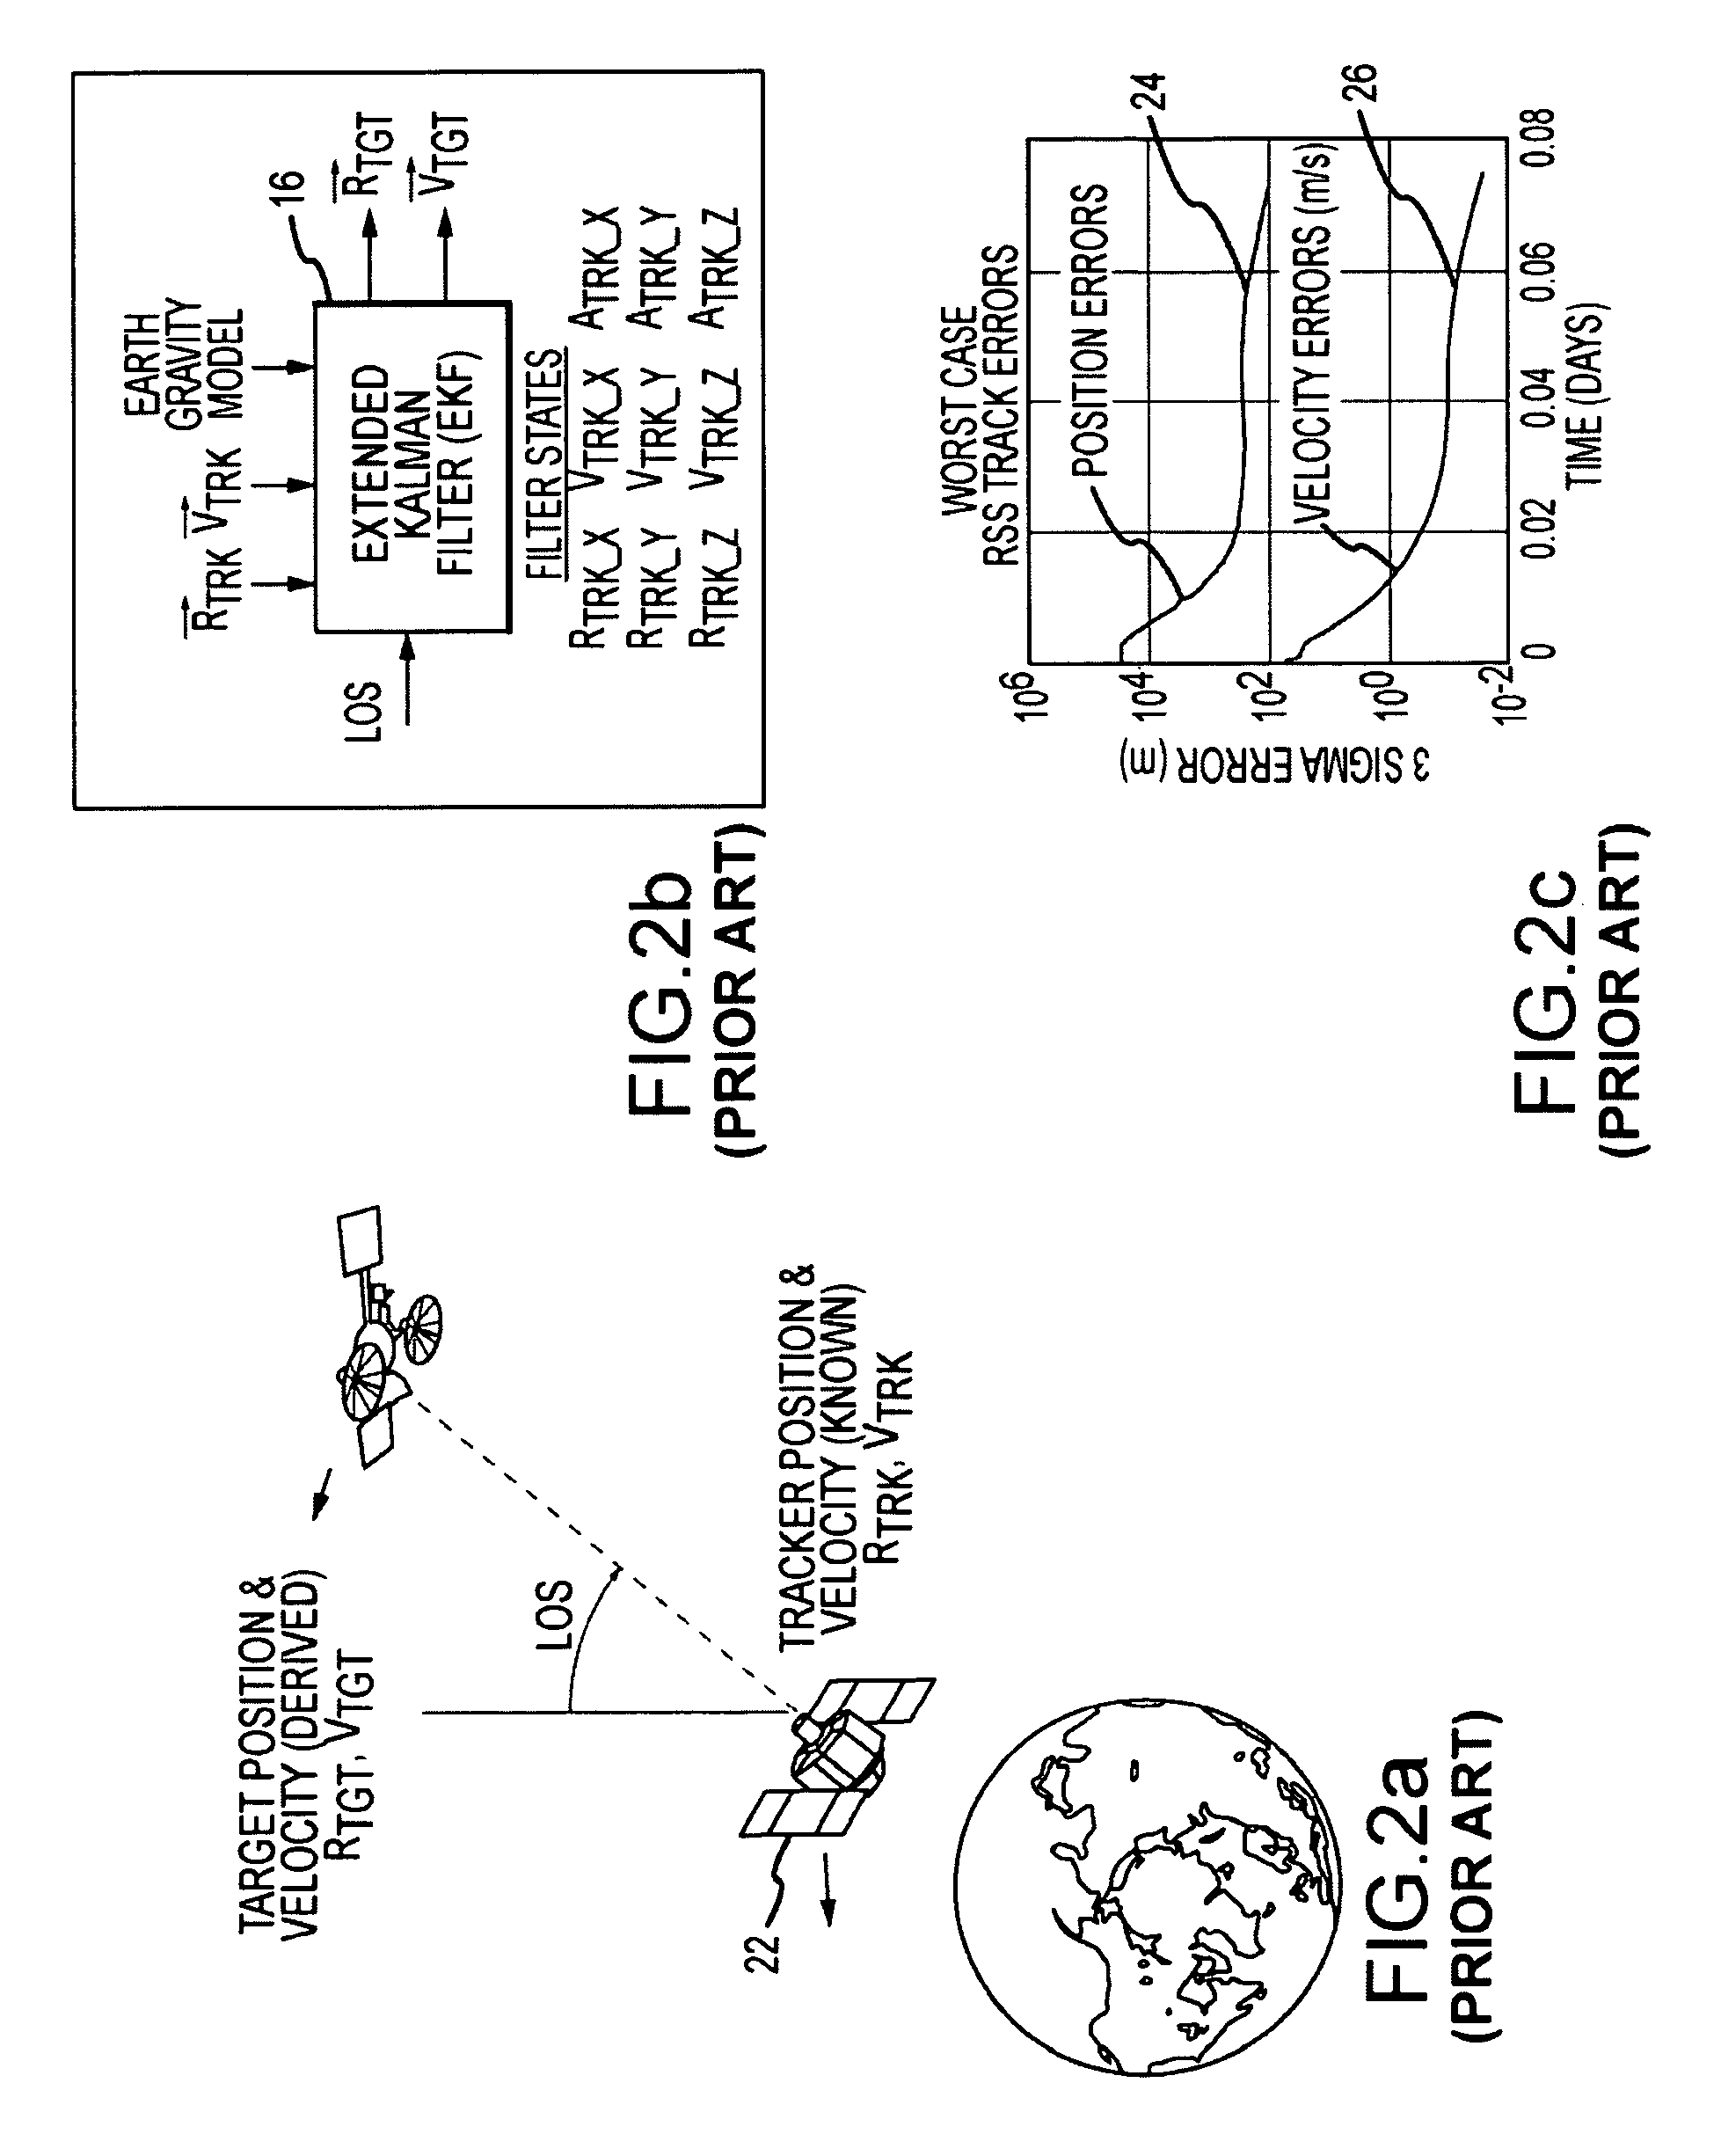 System and method of passive and autonomous navigation of space vehicles using an extended Kalman filter